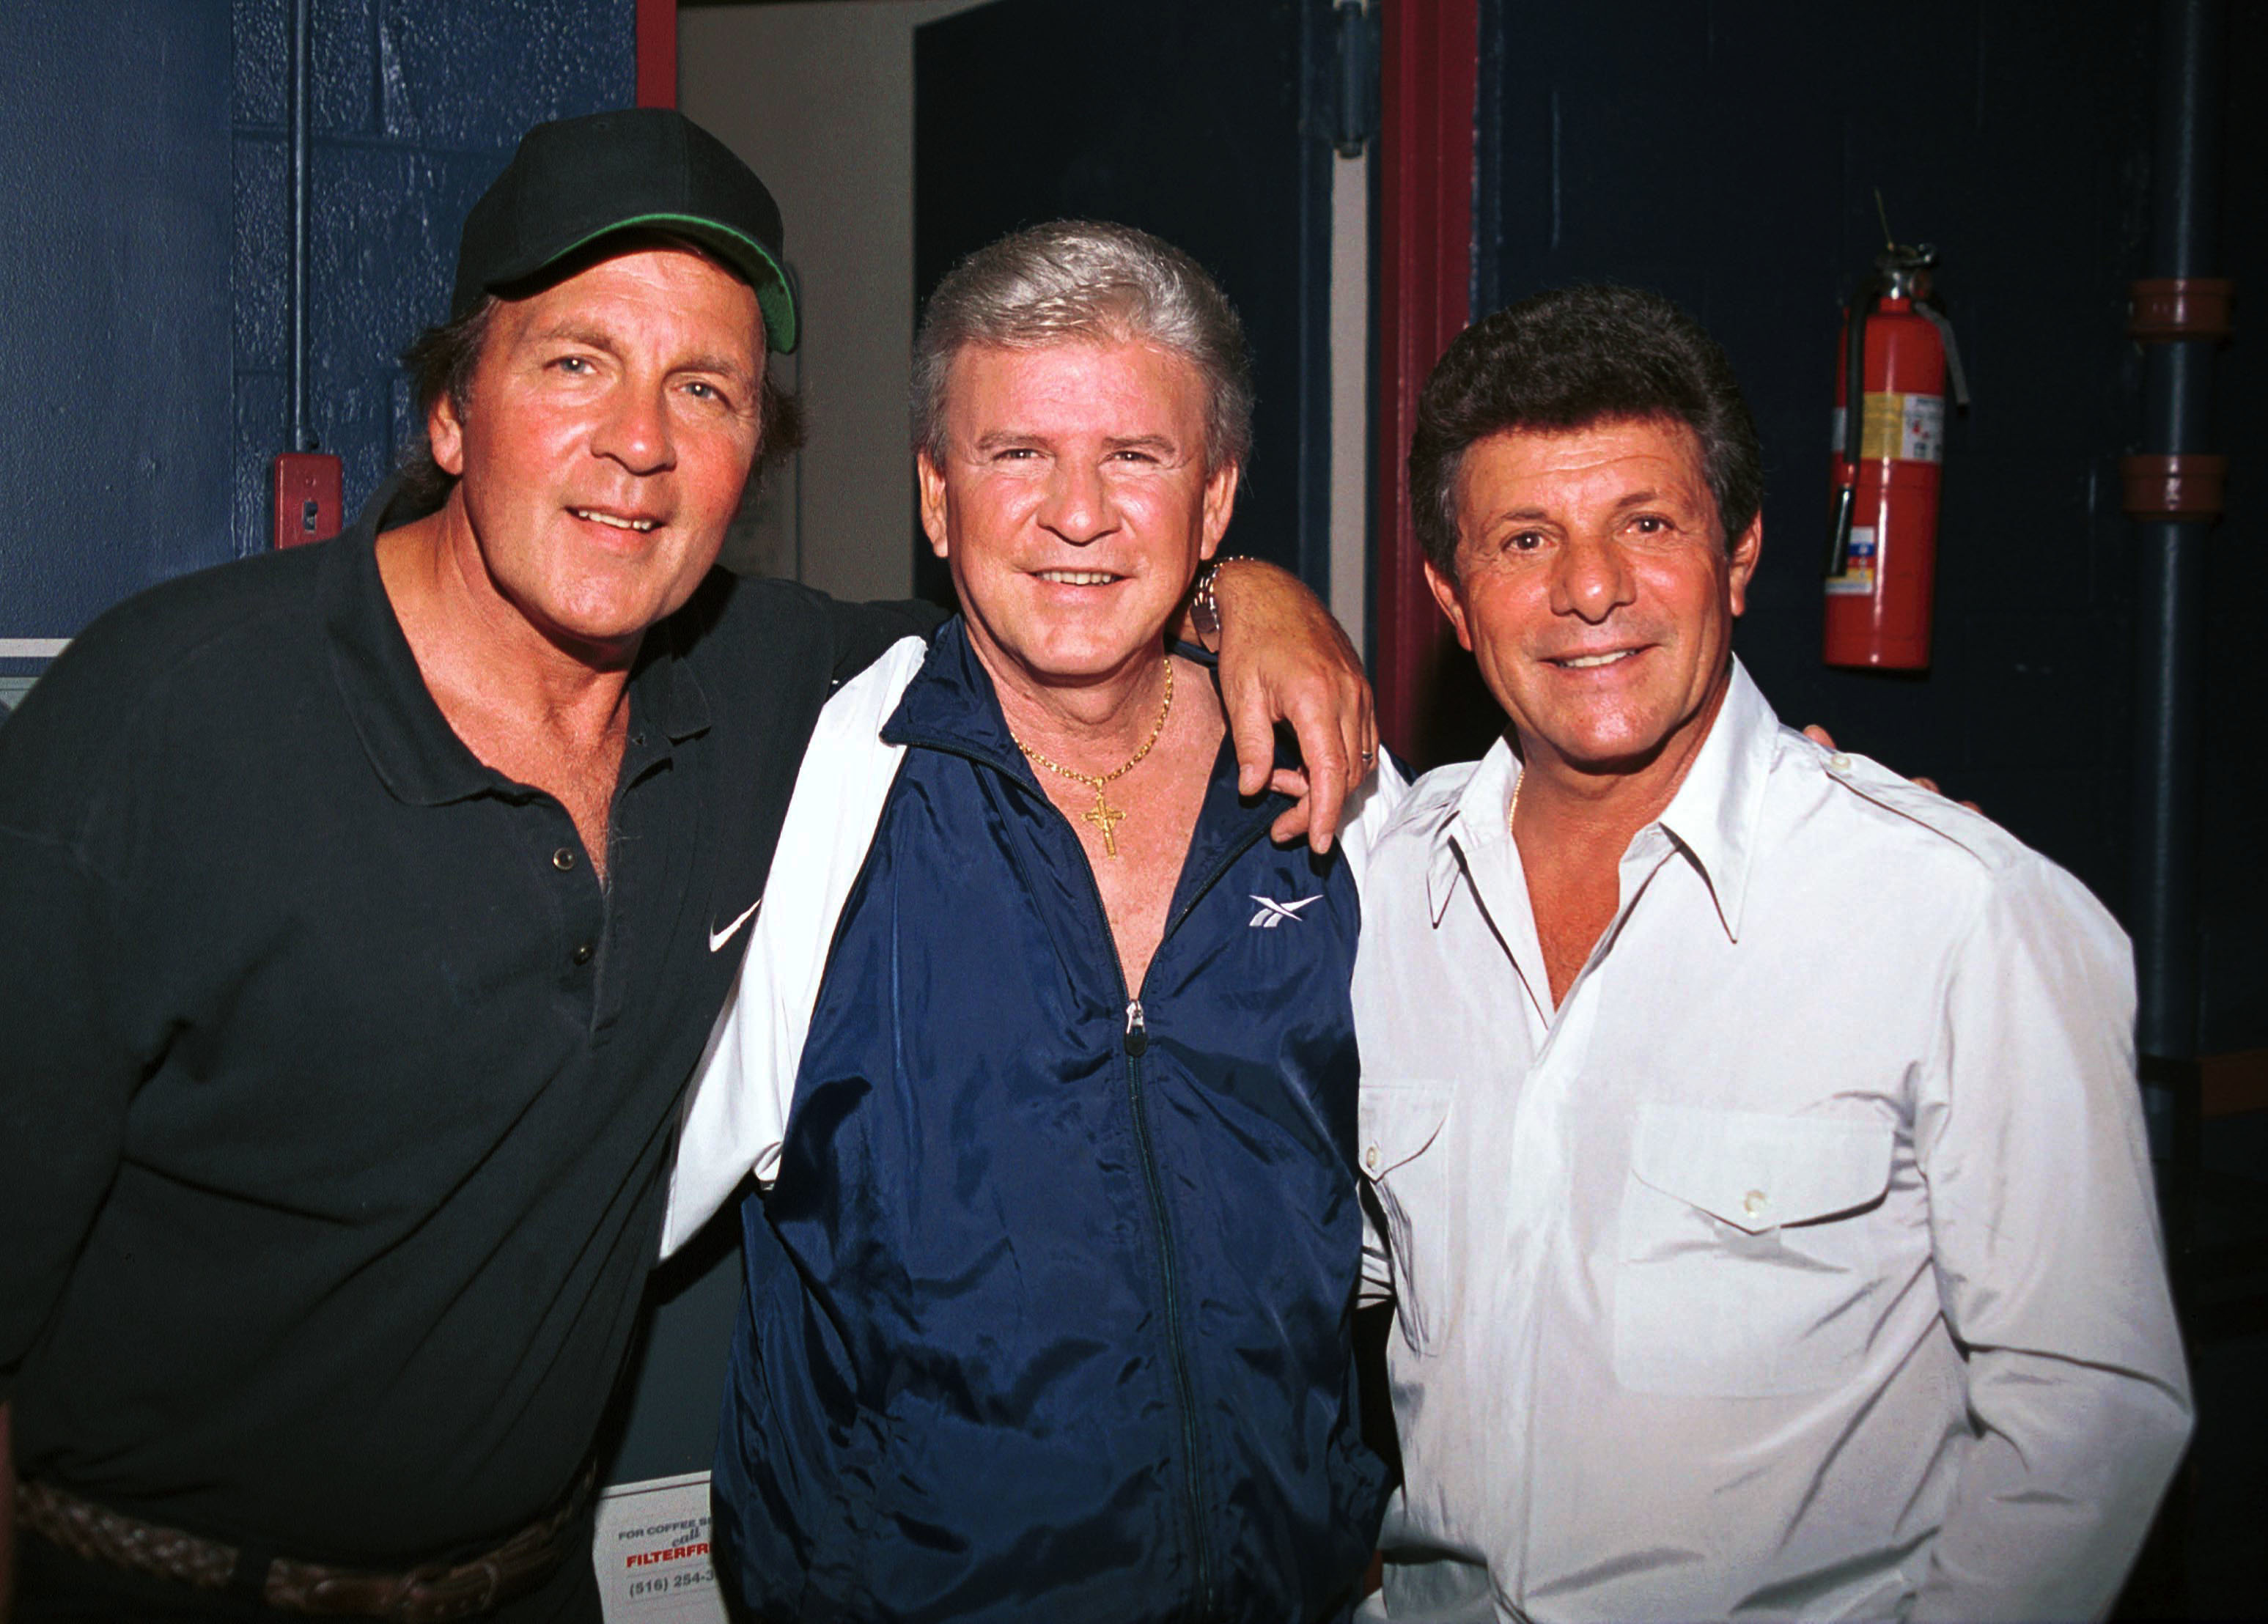 Fabian, Bobby Rydell and Frankie Avalon backstage after their sold out show at the Westbury Music Fair. | Source: Getty Images